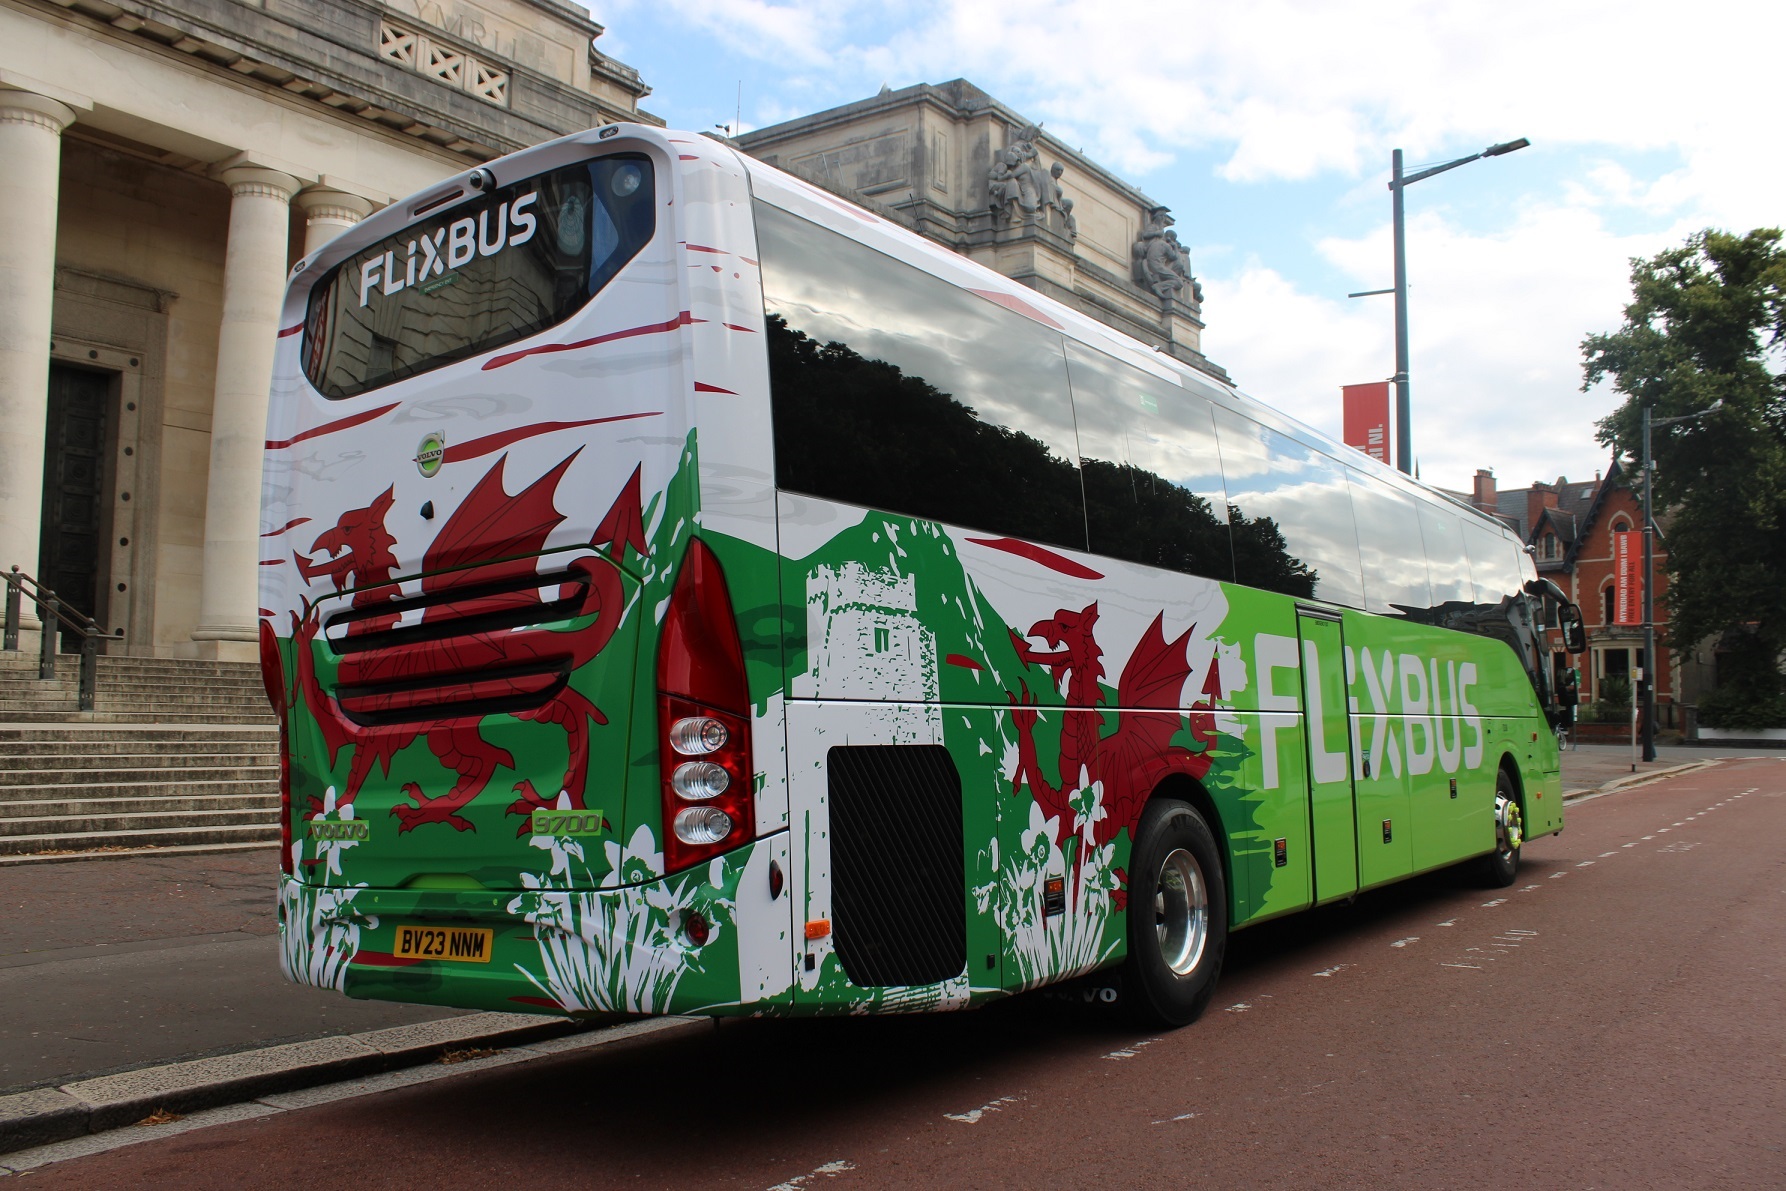 Newport Transport operates scheduled coach services to and from Wales